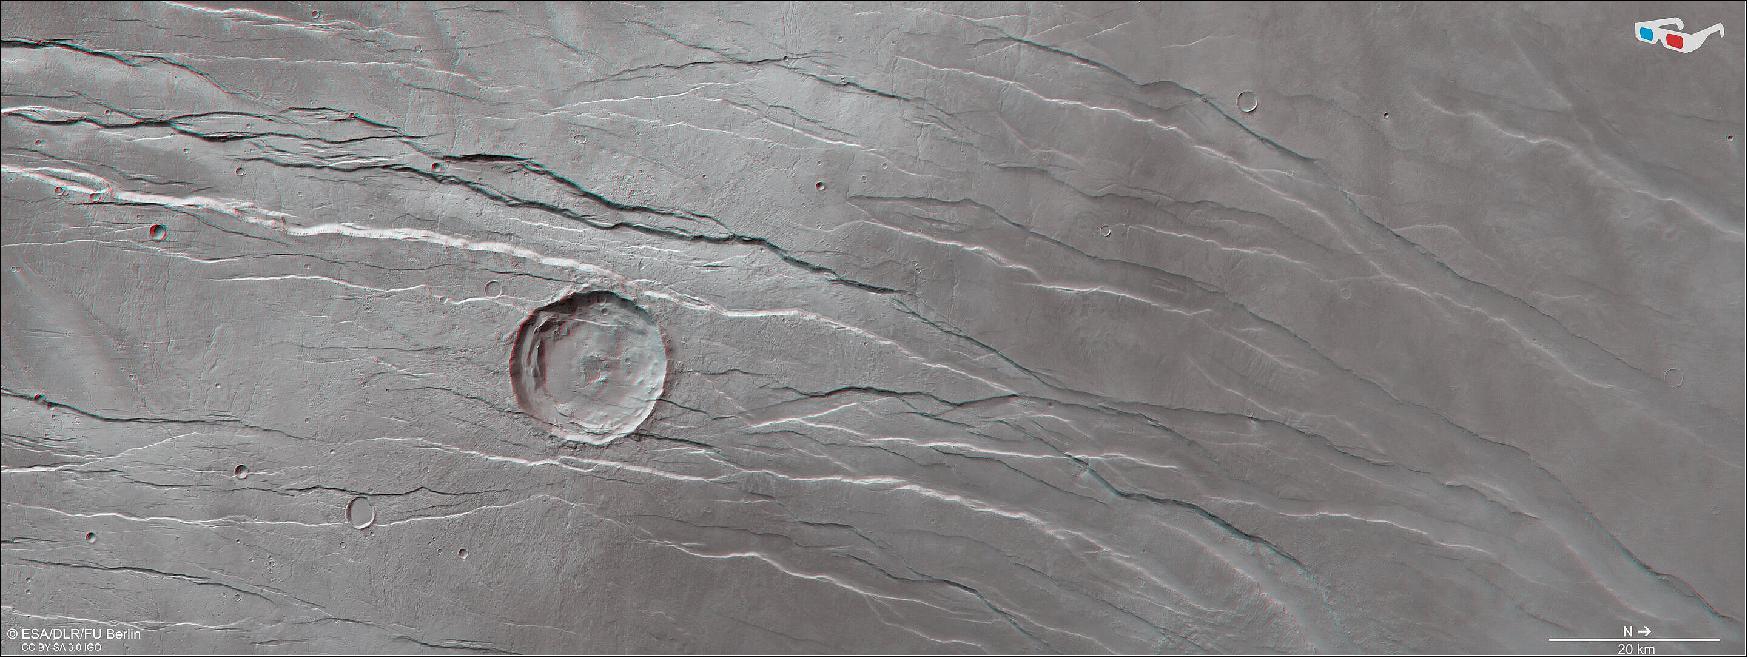 Figure 21: Tantalus Fossae in 3D. This stereoscopic image shows Tantalus Fossae on Mars, and was generated from data captured by the High Resolution Stereo Camera (HRSC) on ESA’s Mars Express orbiter on 19 July 2021 during orbit 22173. The anaglyph, derived from data acquired by the nadir channel and one stereo channel of the HRSC, offers a three-dimensional view when viewed using red-green or red-blue glasses (image credit: ESA/DLR/FU Berlin, CC BY-SA 3.0 IGO)